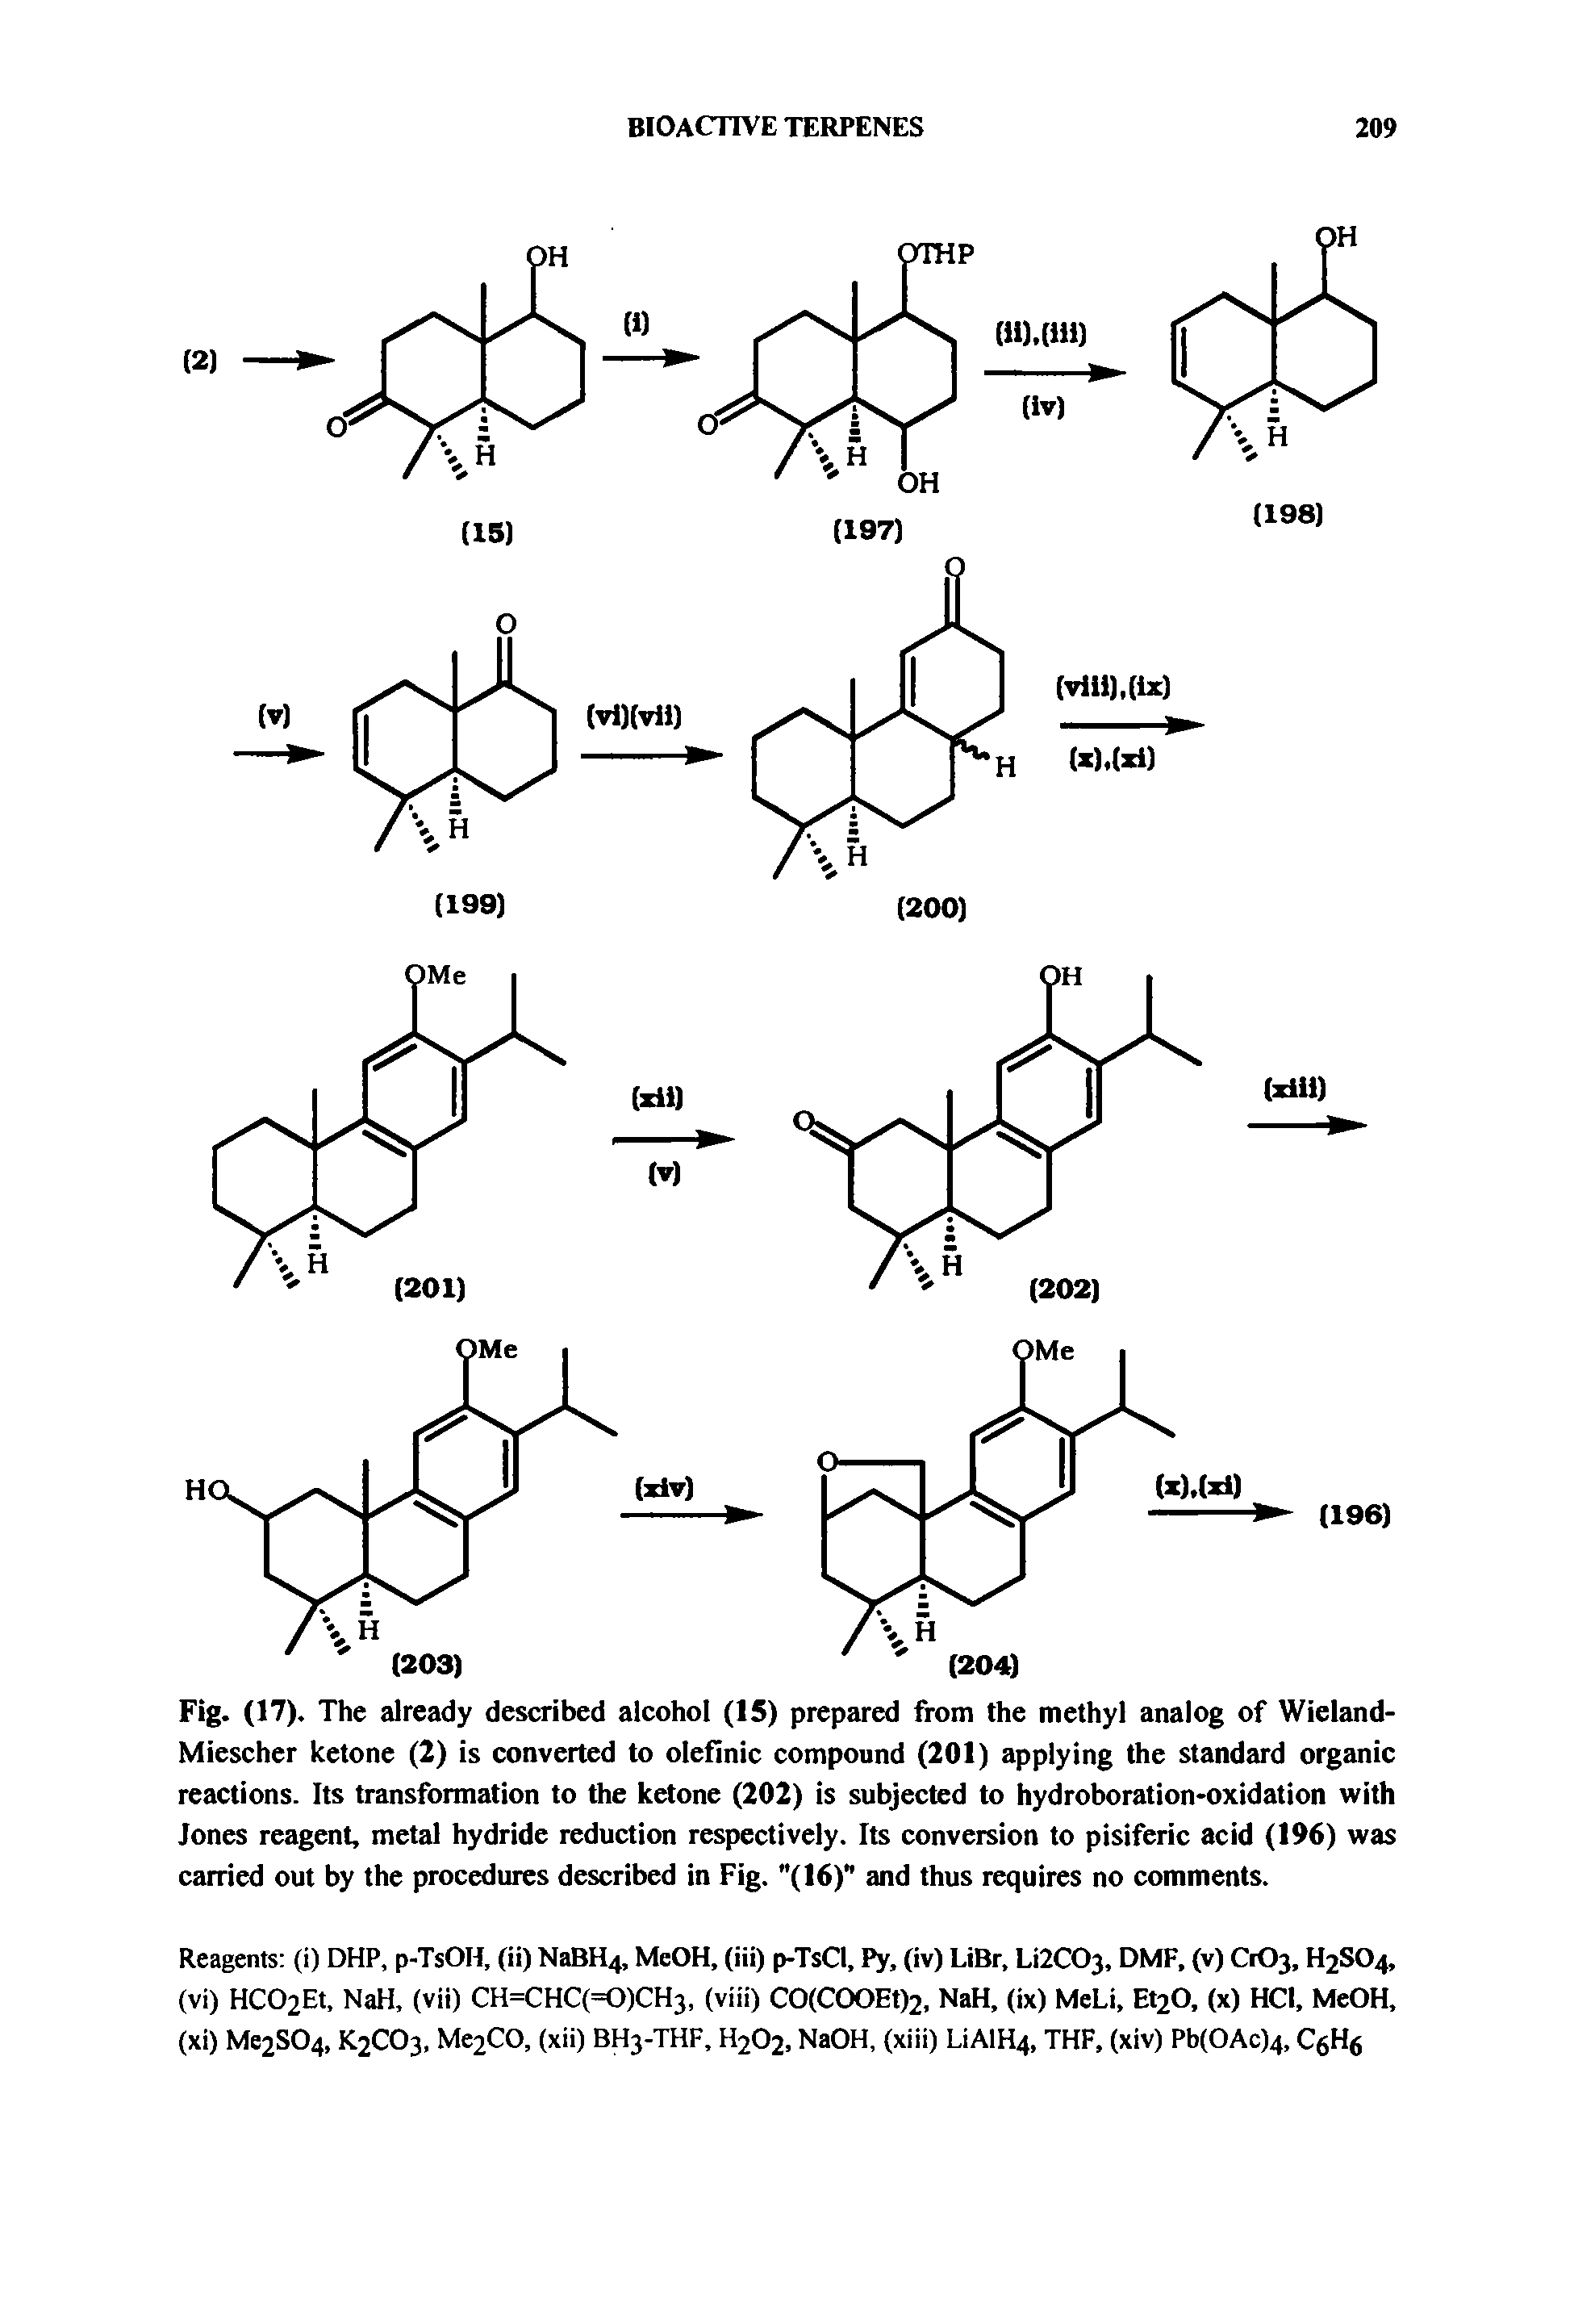 Fig. (17). The already described alcohol (15) prepared from the methyl analog of Wieland-Miescher ketone (2) is converted to olefinic compound (201) applying the standard organic reactions. Its transformation to the ketone (202) is subjected to hydroboration-oxidation with Jones reagent, metal hydride reduction respectively. Its conversion to pisiferic acid (196) was carried out by the procedures described in Fig. (16)" and thus requires no comments.